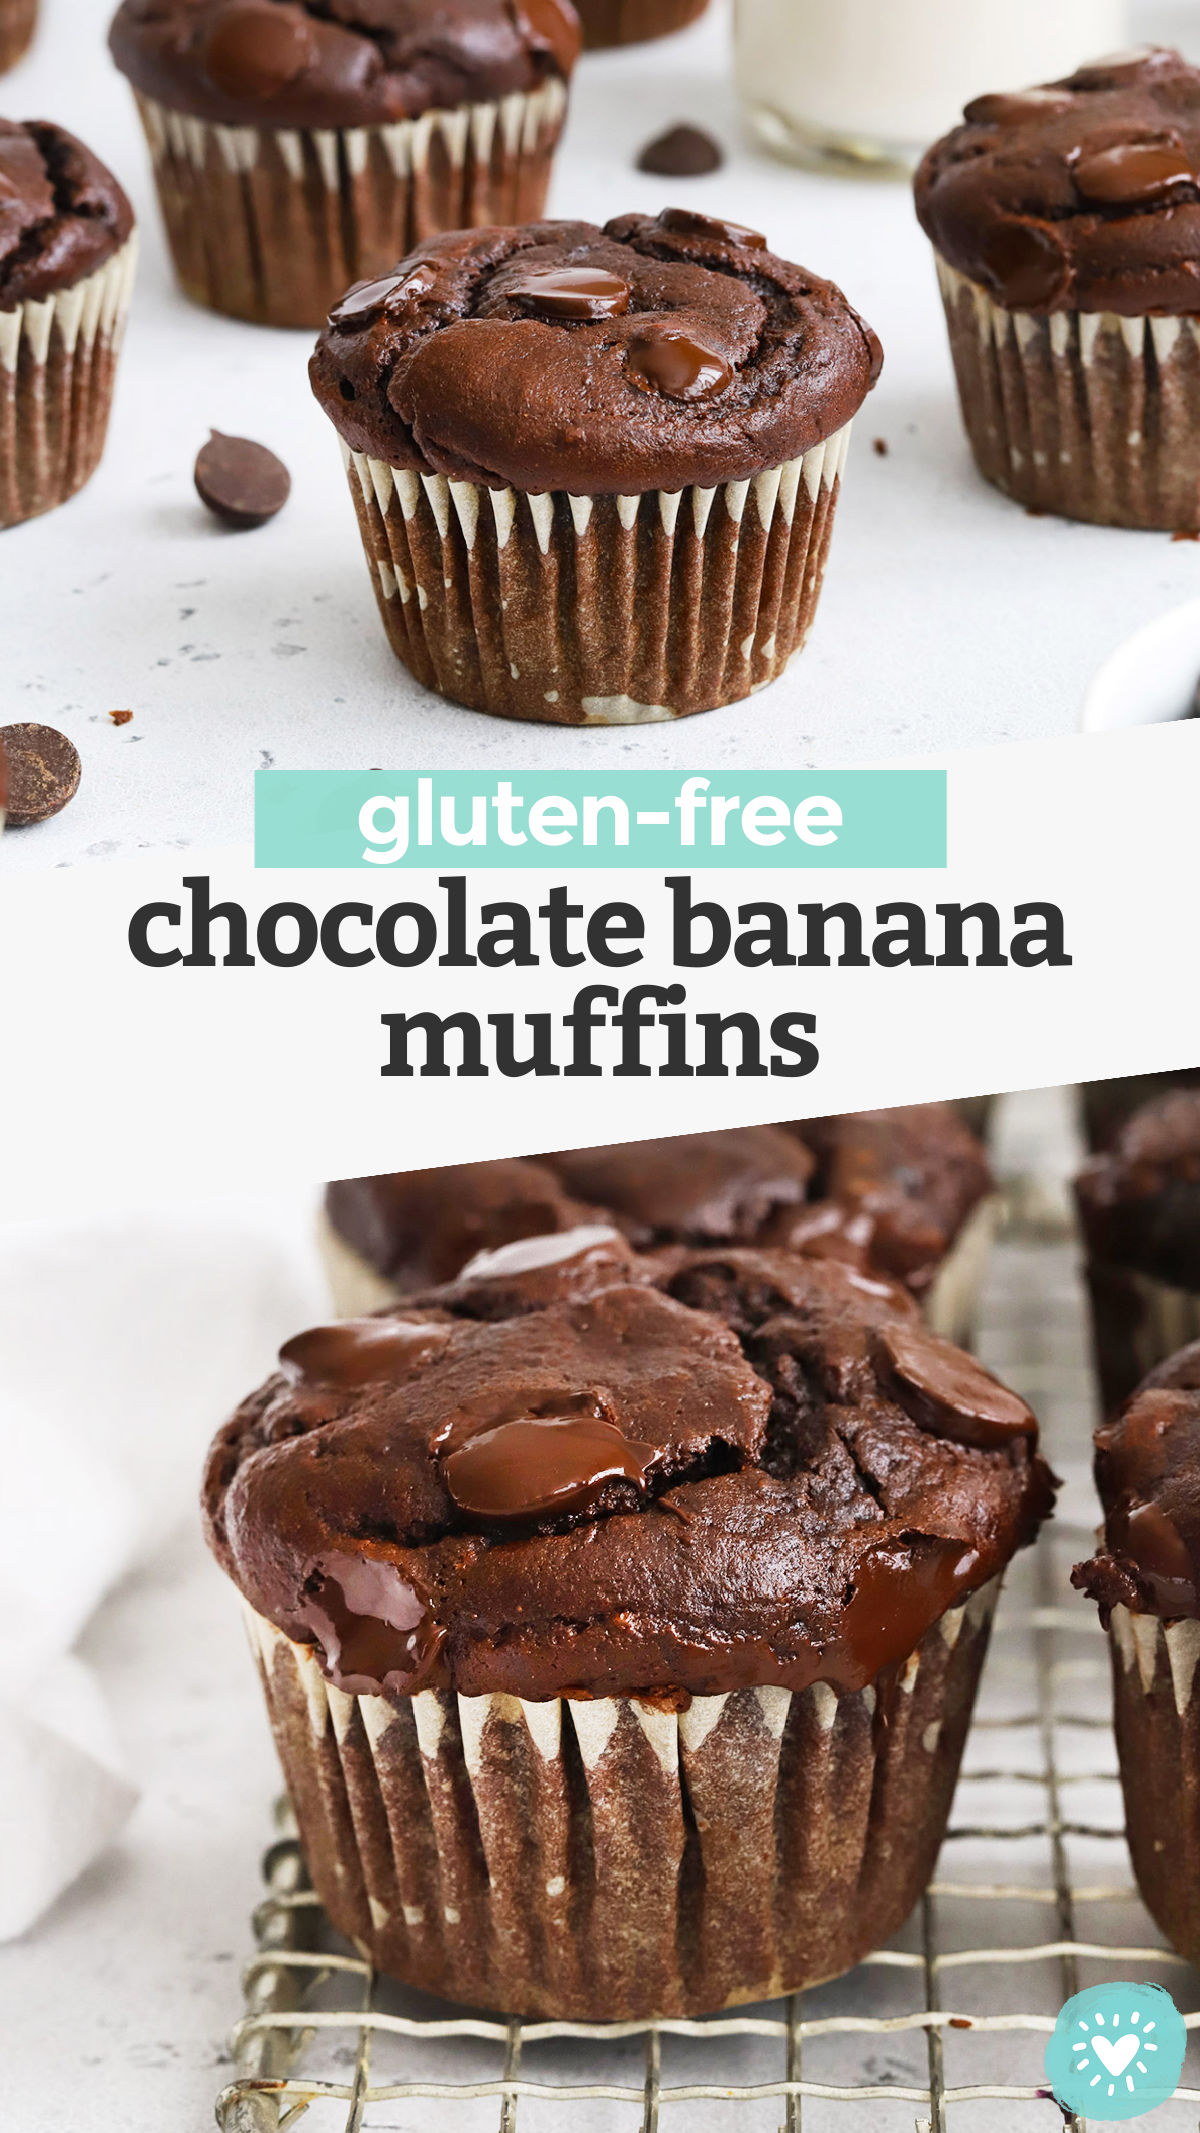 Gluten-Free Chocolate Banana Muffins - These gluten-free double chocolate banana muffins are light, fluffy, and loaded with ultra-chocolatey flavor. A favorite sweet treat that's easy to make any time! (Dairy-Free) // gluten-free chocolate chocolate chip muffins // gluten free banana muffins recipe #glutenfree #muffins #breakfast #snack #chocolate #banana